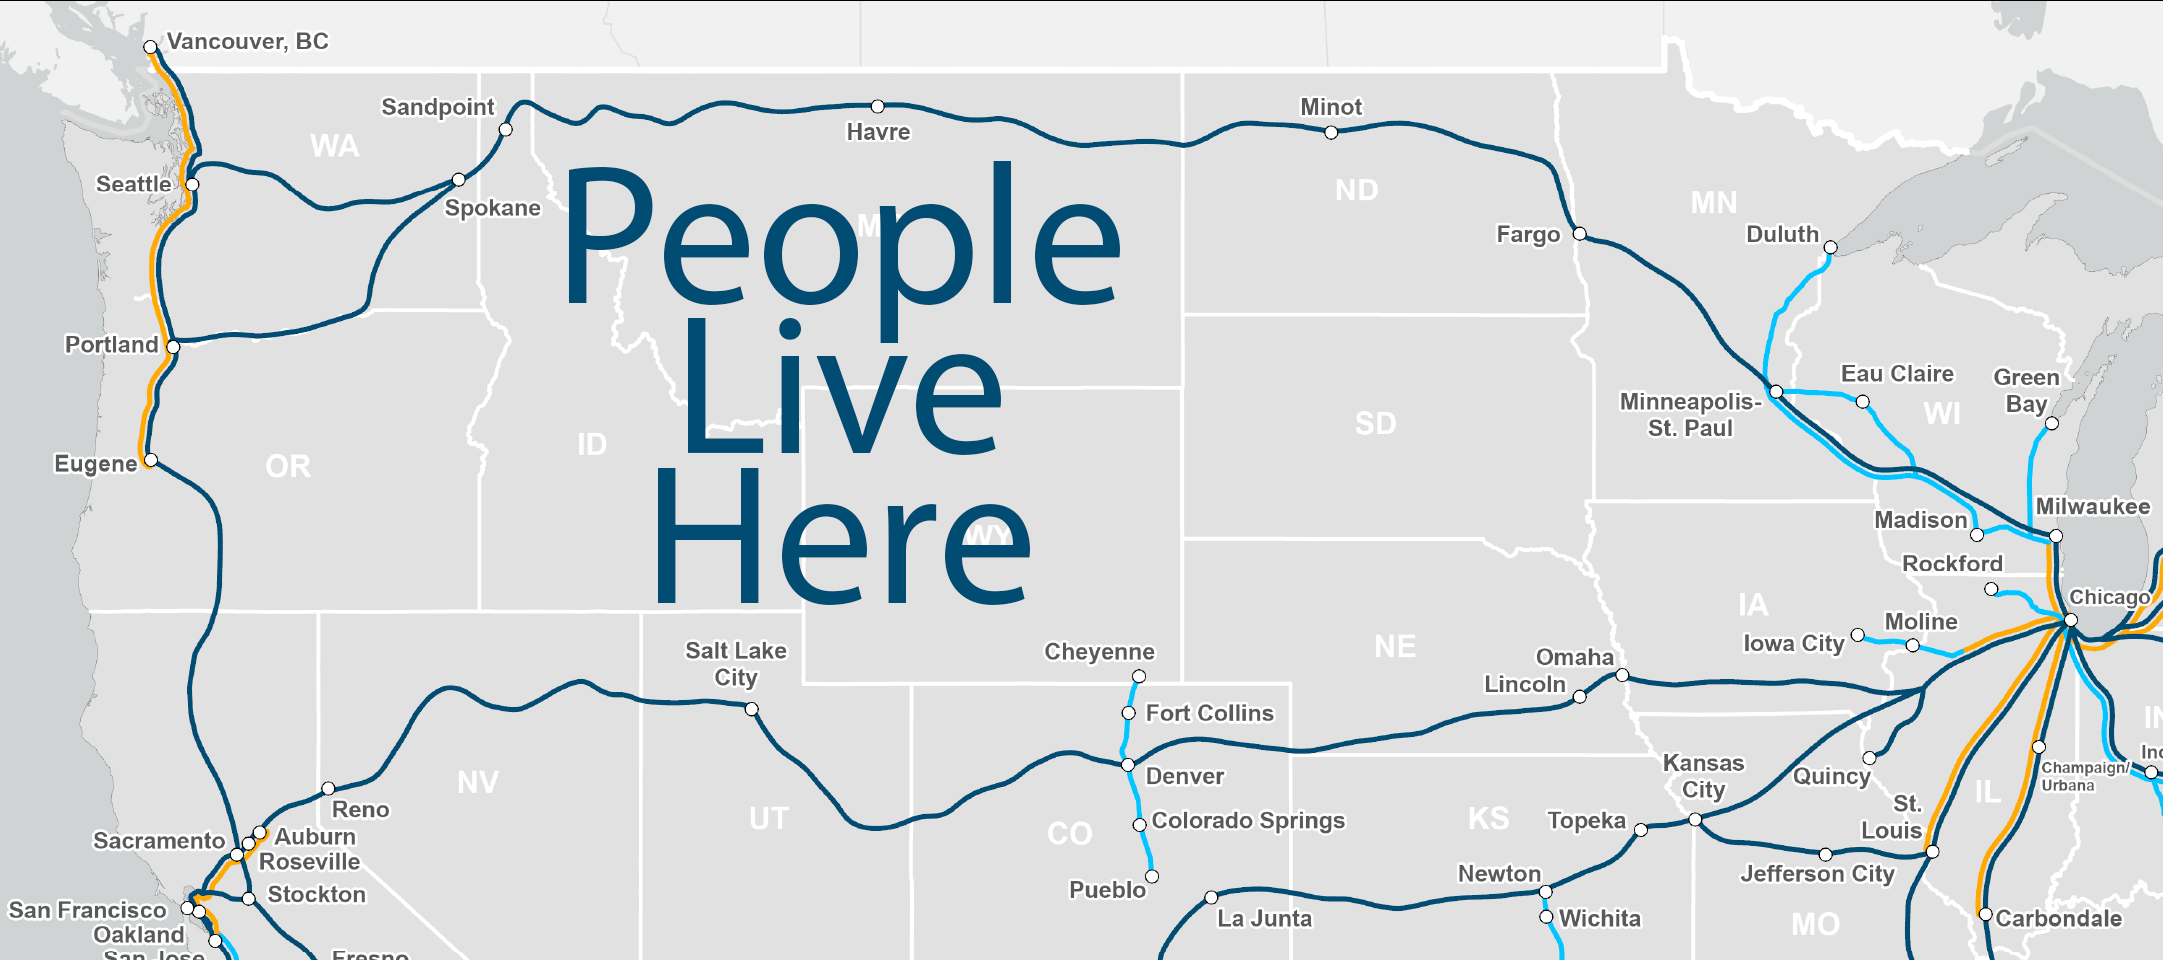 Map showing gap in rail network in the Greater Northwest. "People Live Here!" superimposed.